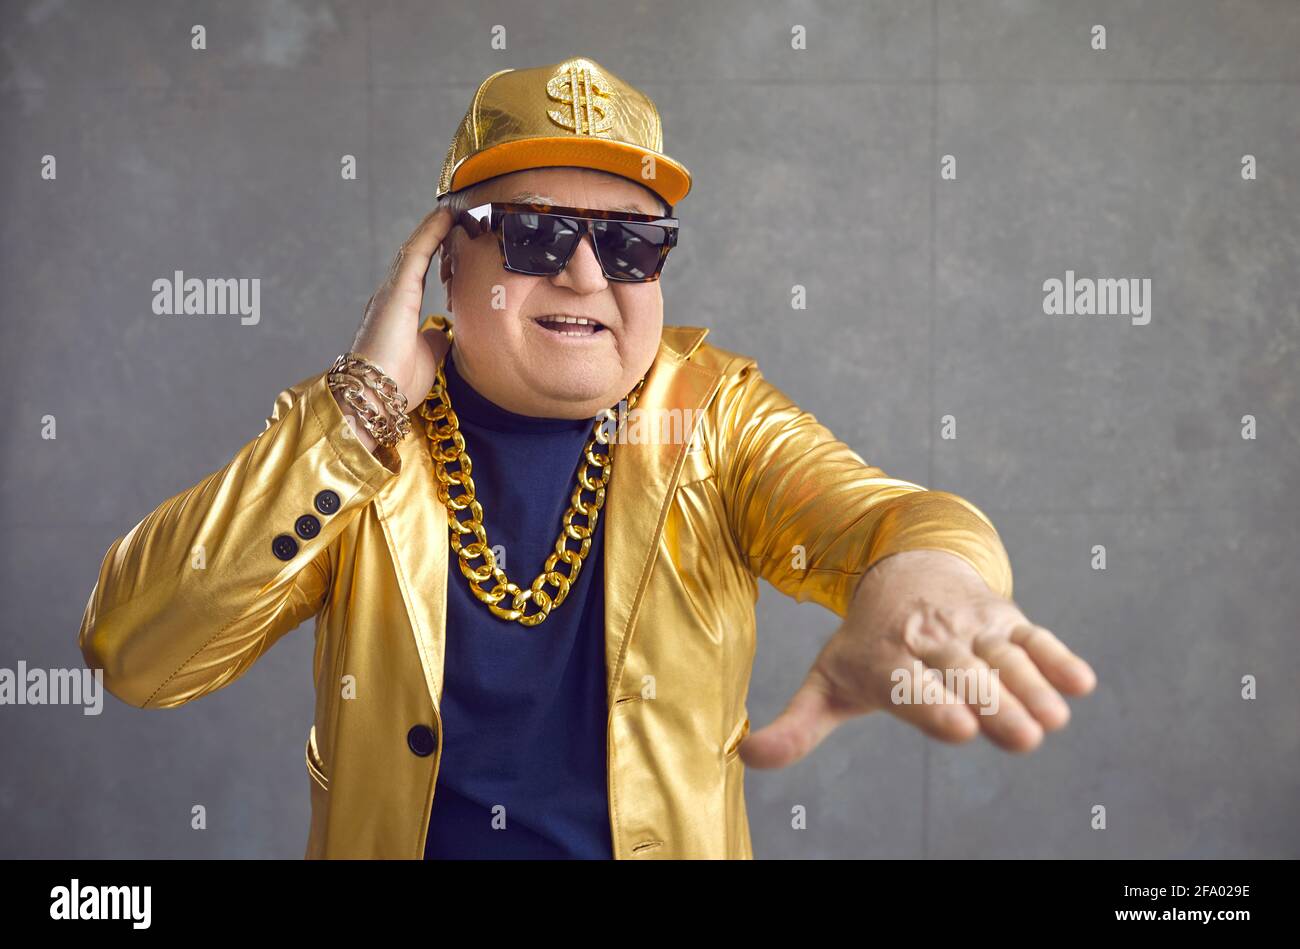 Funny senior man in golden jacket, baseball cap and chain necklace playing music at disco party Stock Photo